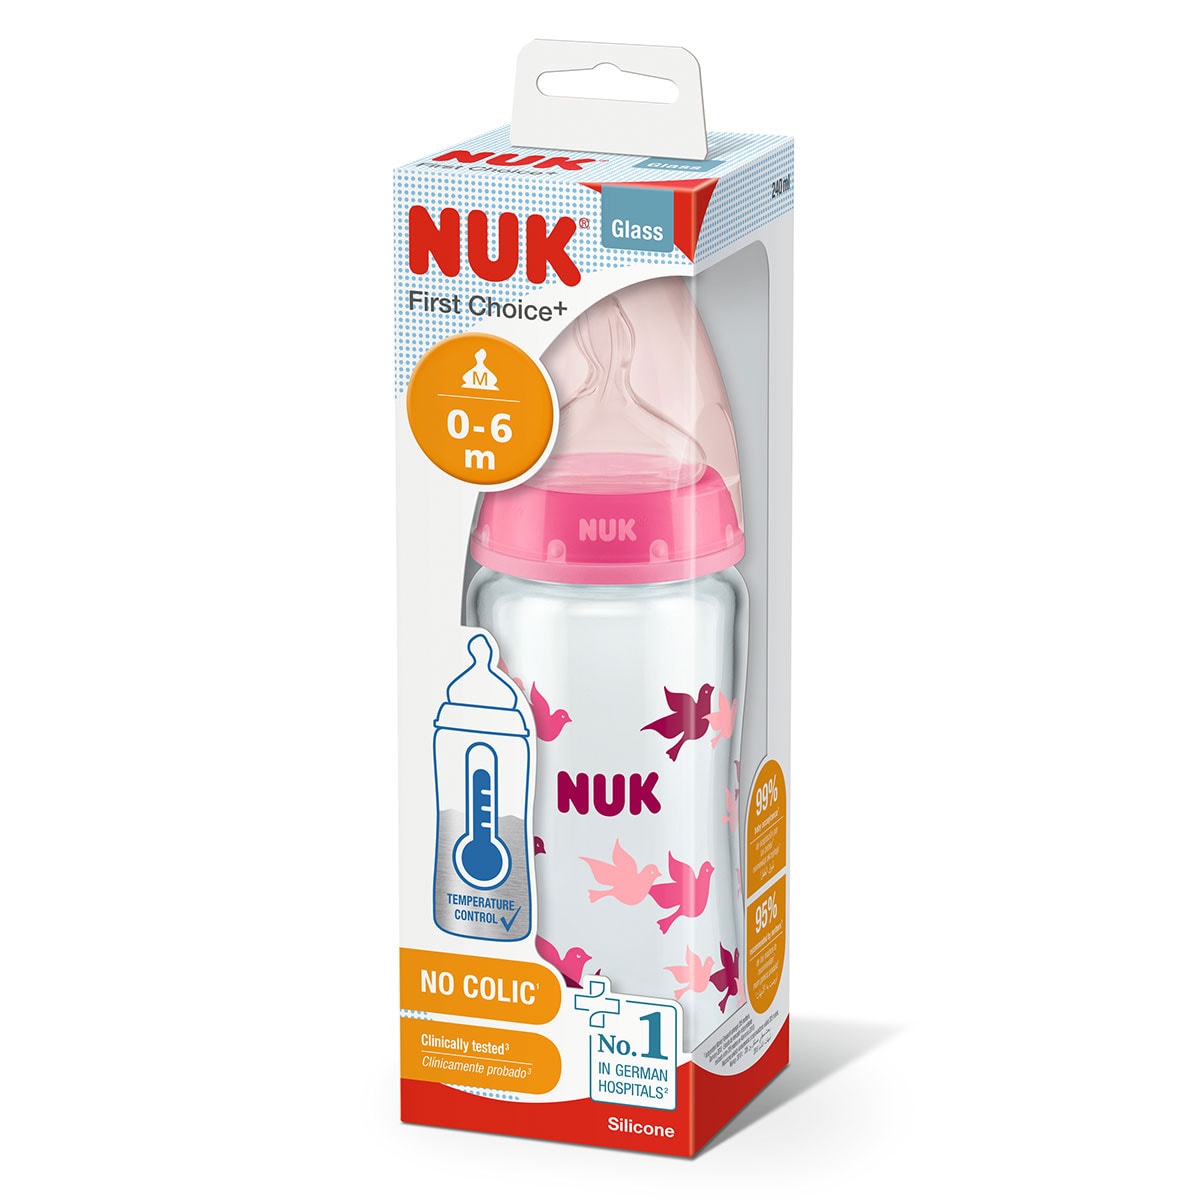 NUK First Choice 240ml Glass Bottle with Temp Control 0-6 months